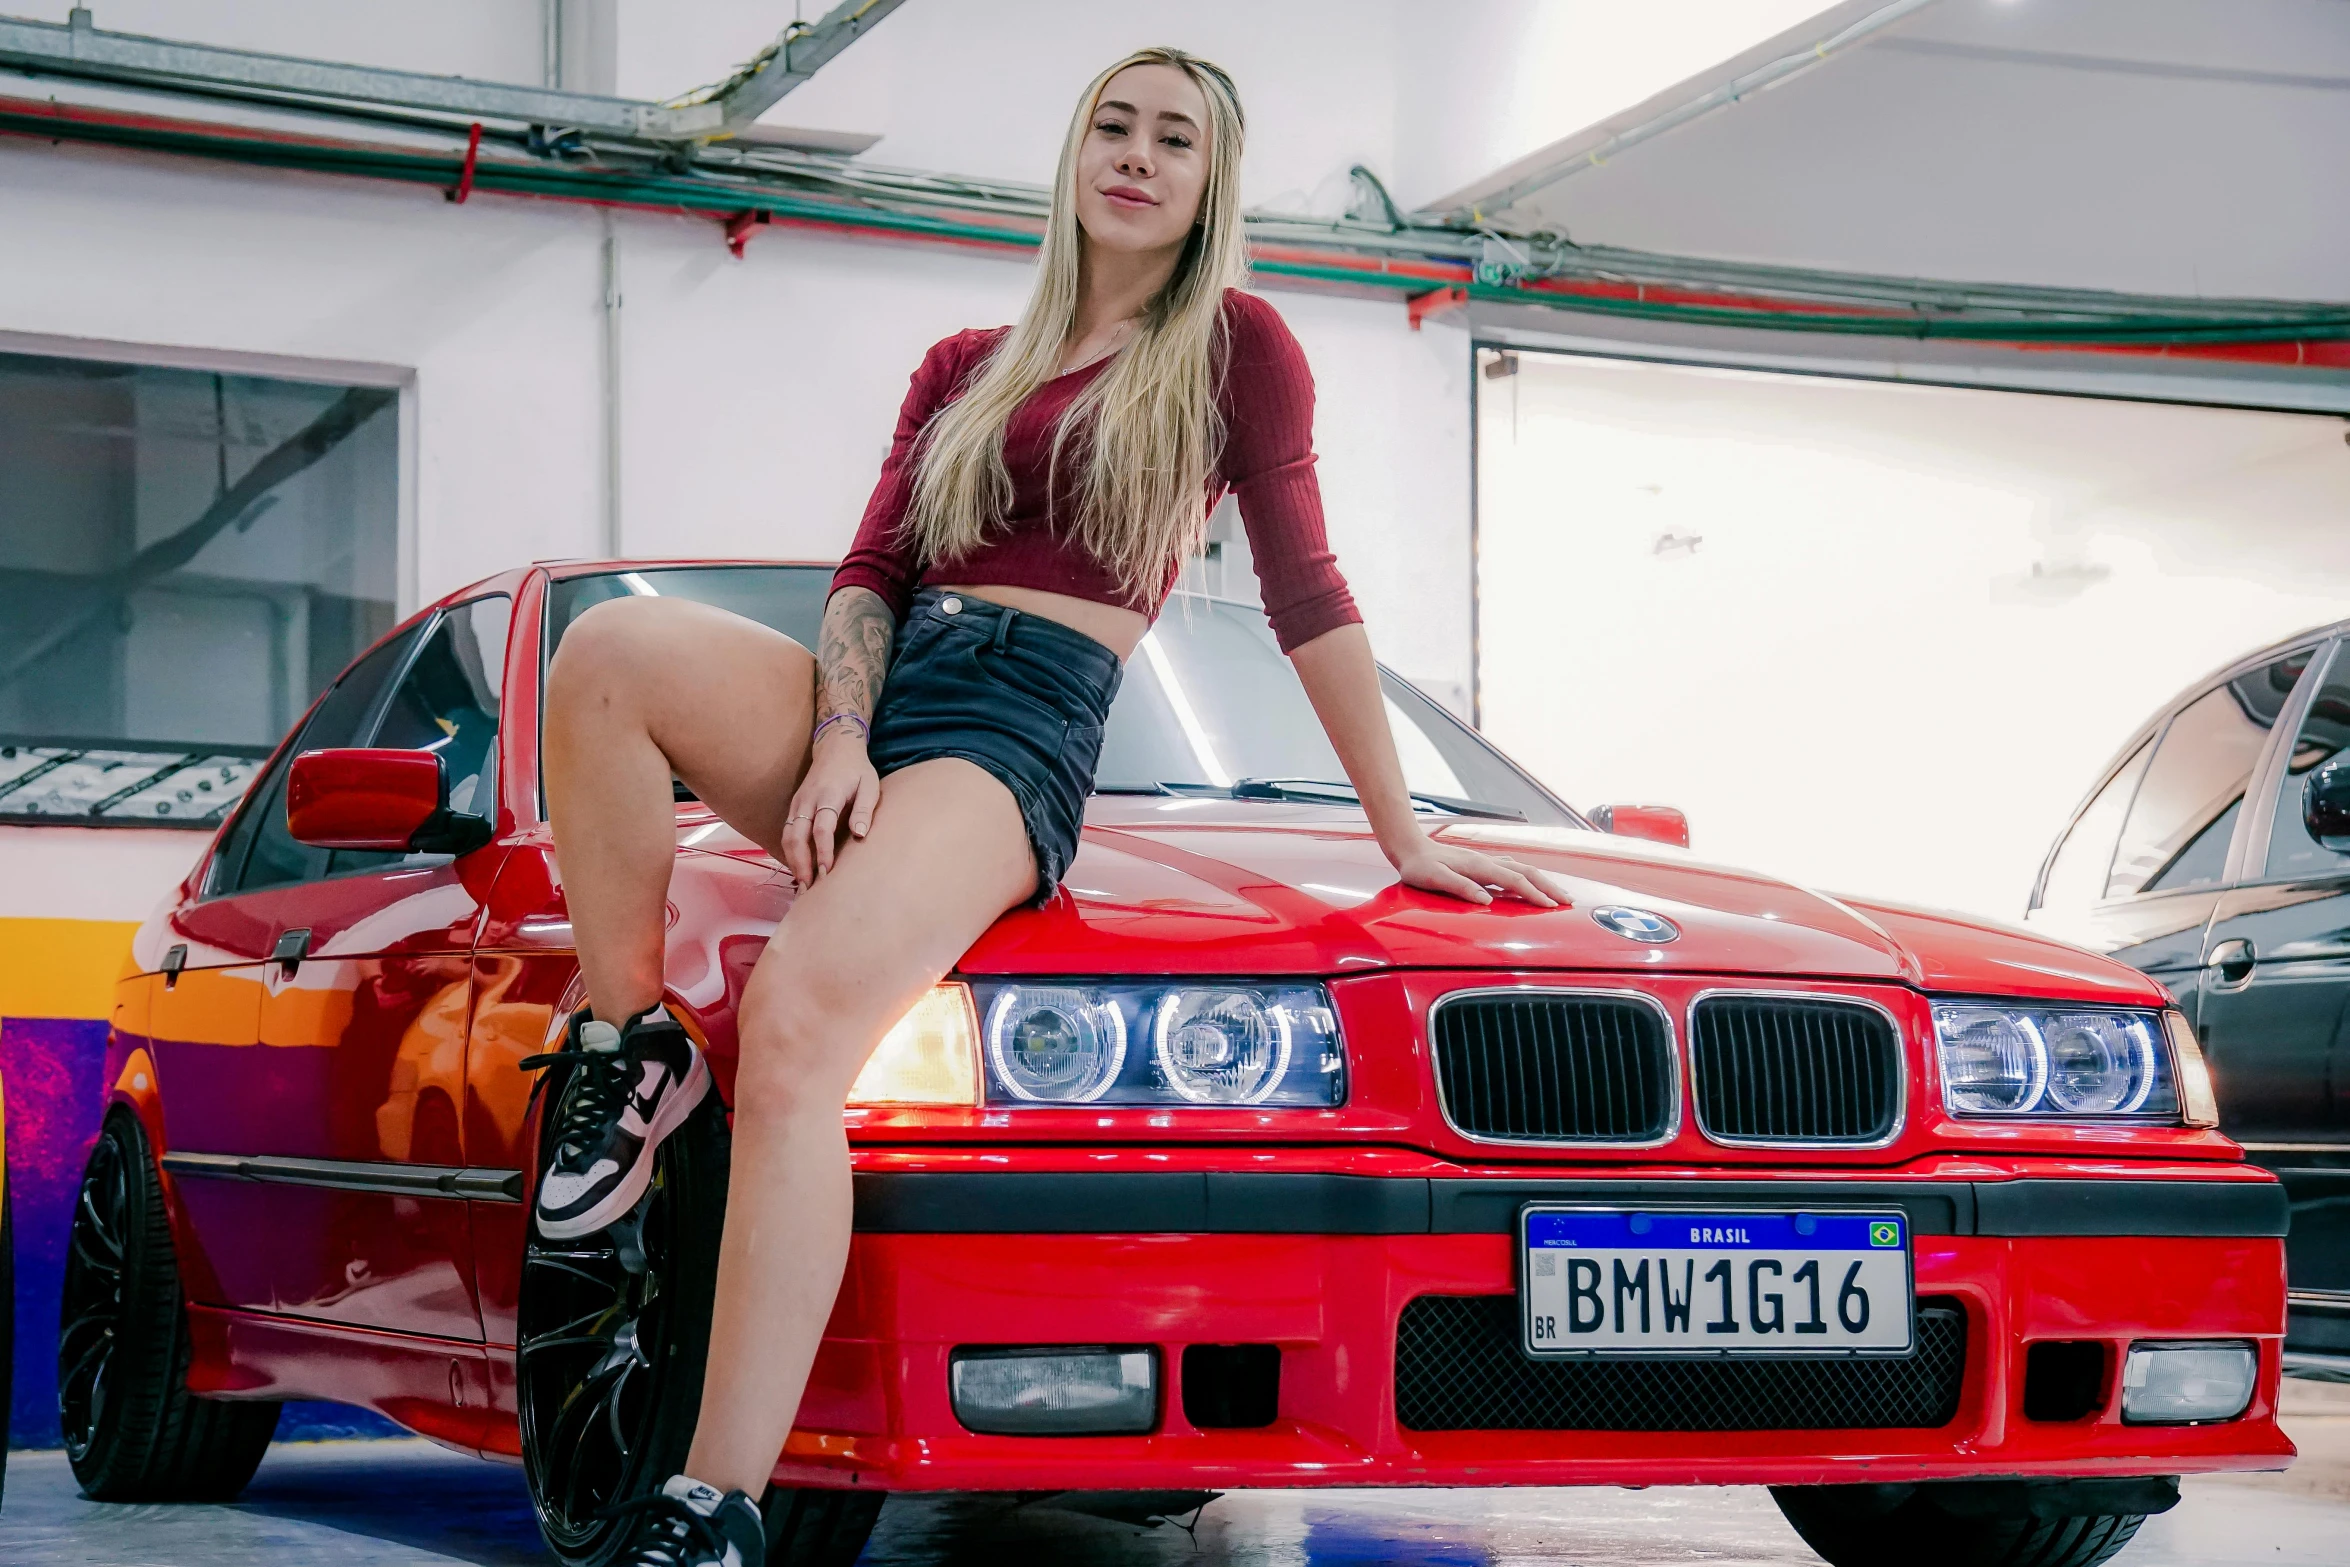 a young woman in tights sitting on the hood of a red car